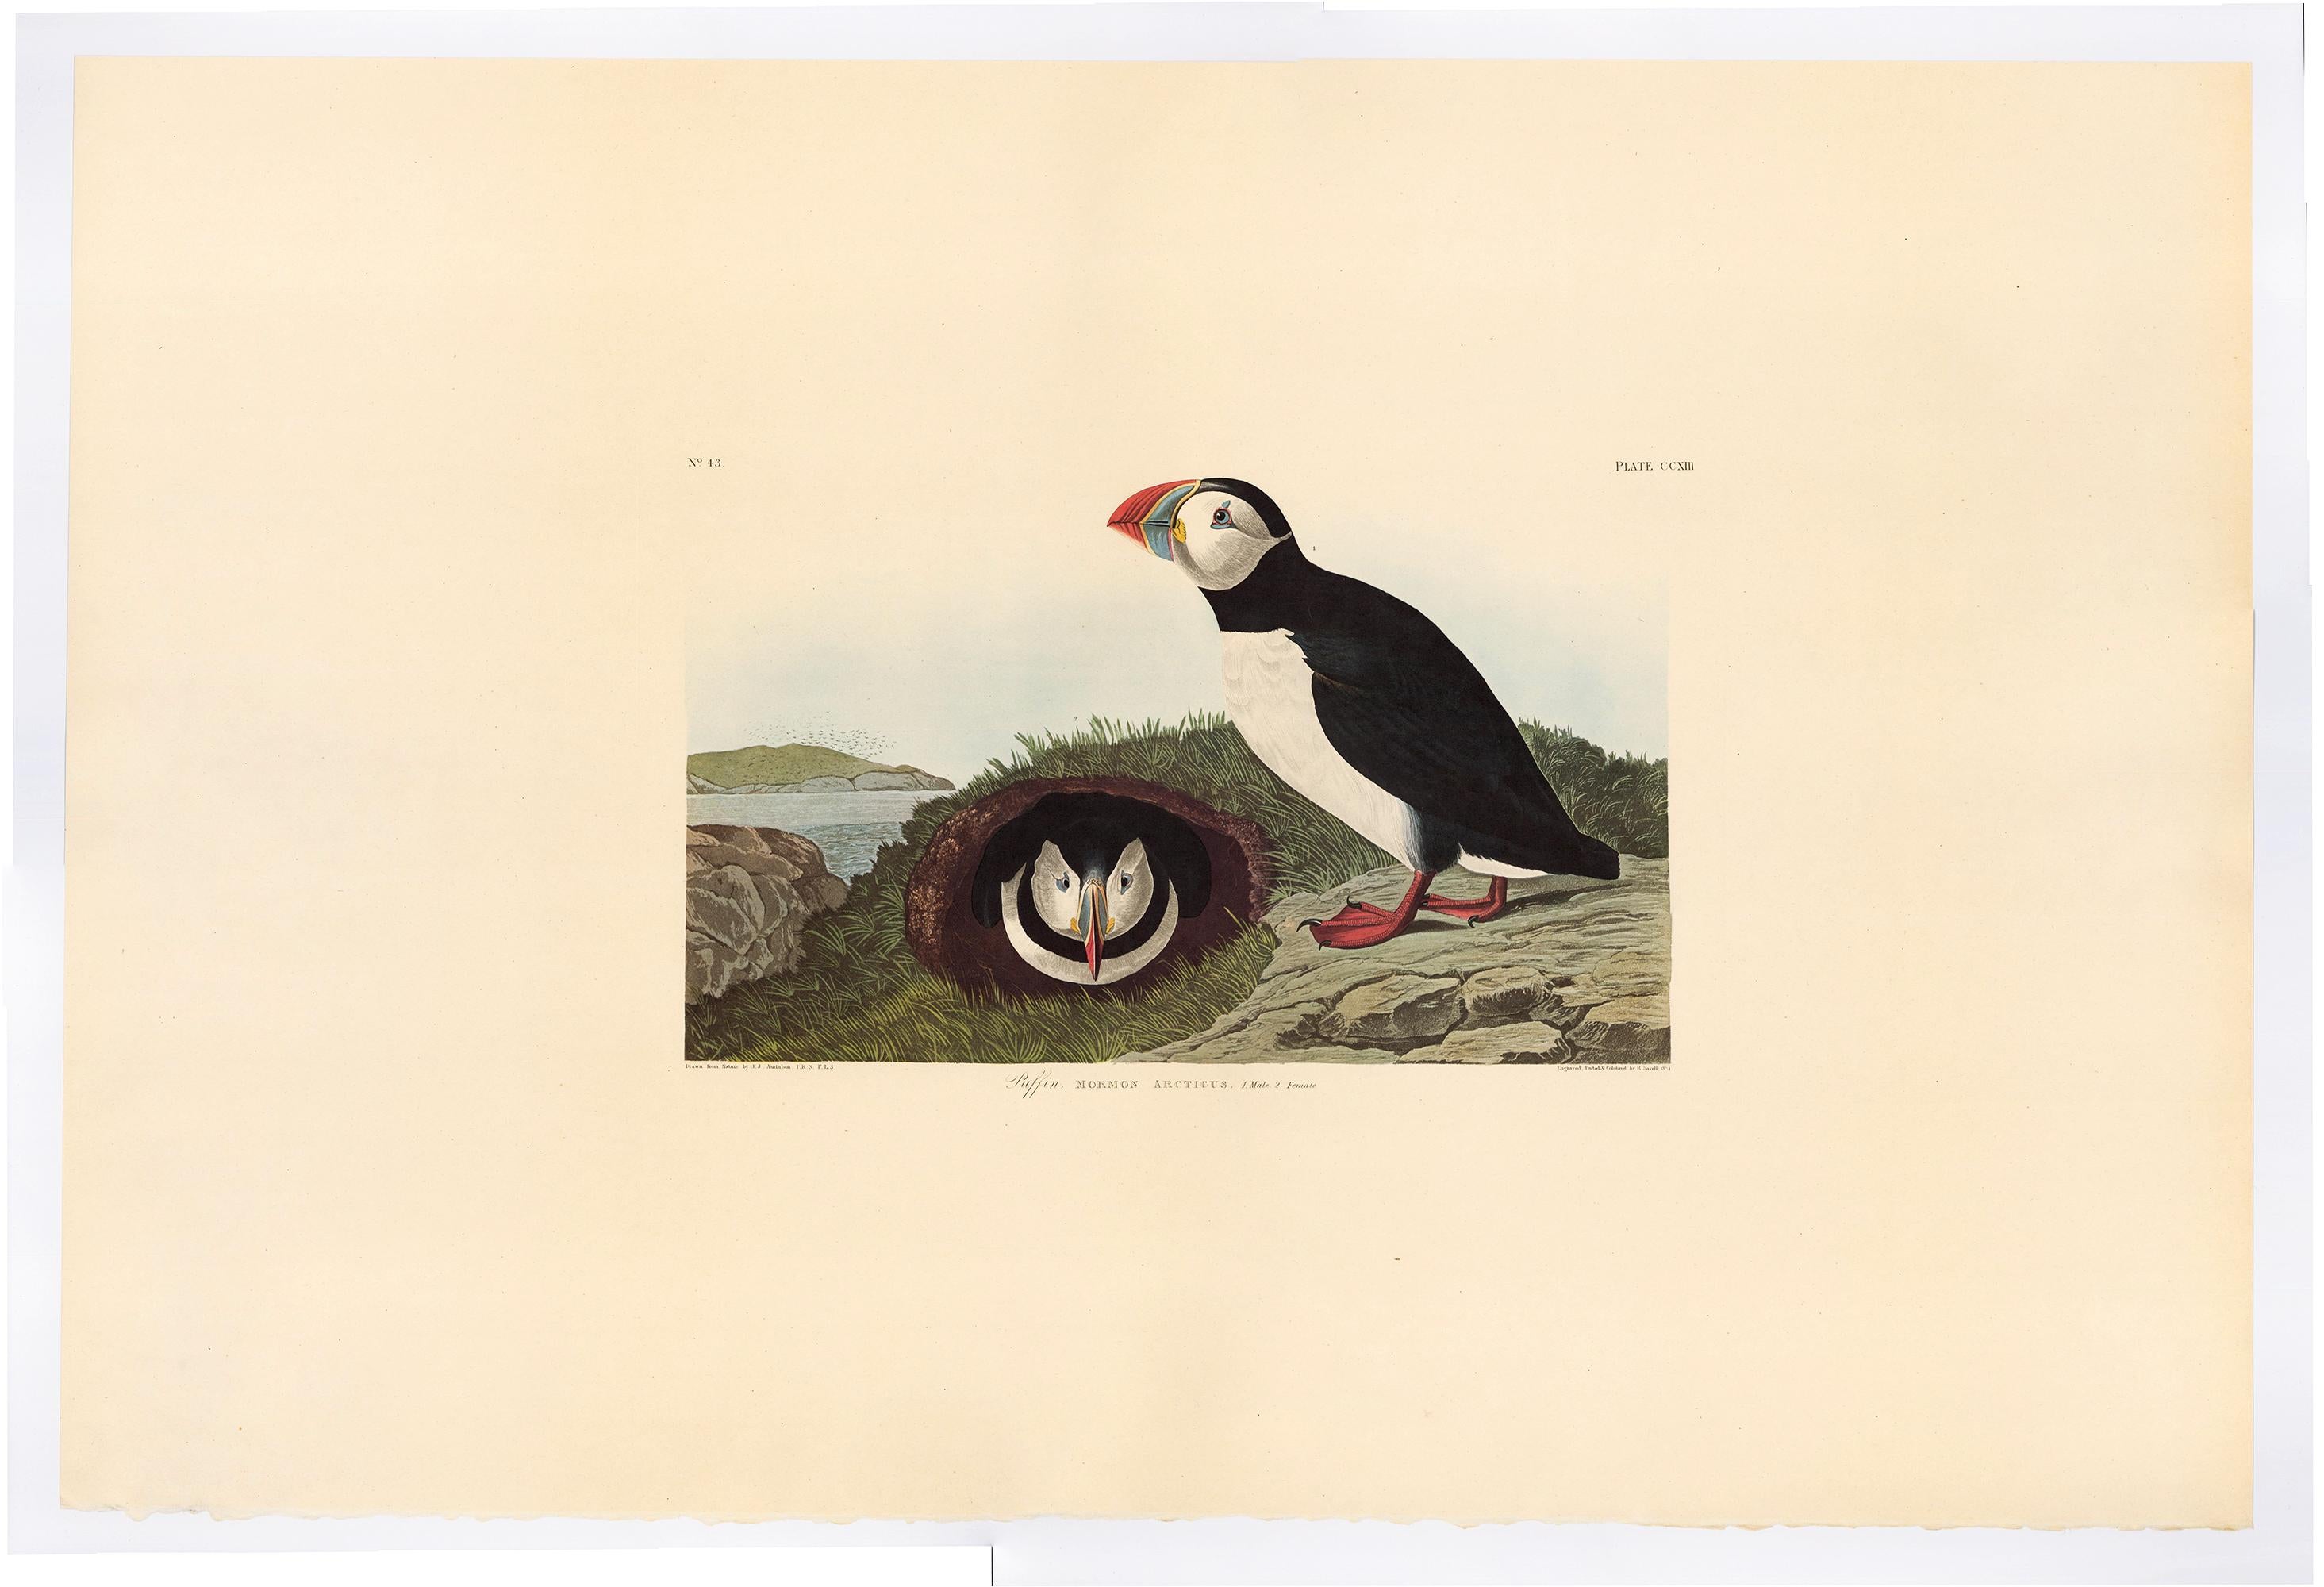 Plate  CCXIII, Puffin, posthumous reproduction after John James Audubon from The Birds of America, the Amsterdam Edition, printed in Amsterdam, 1971-73. Original multicolored photo-offset print. 